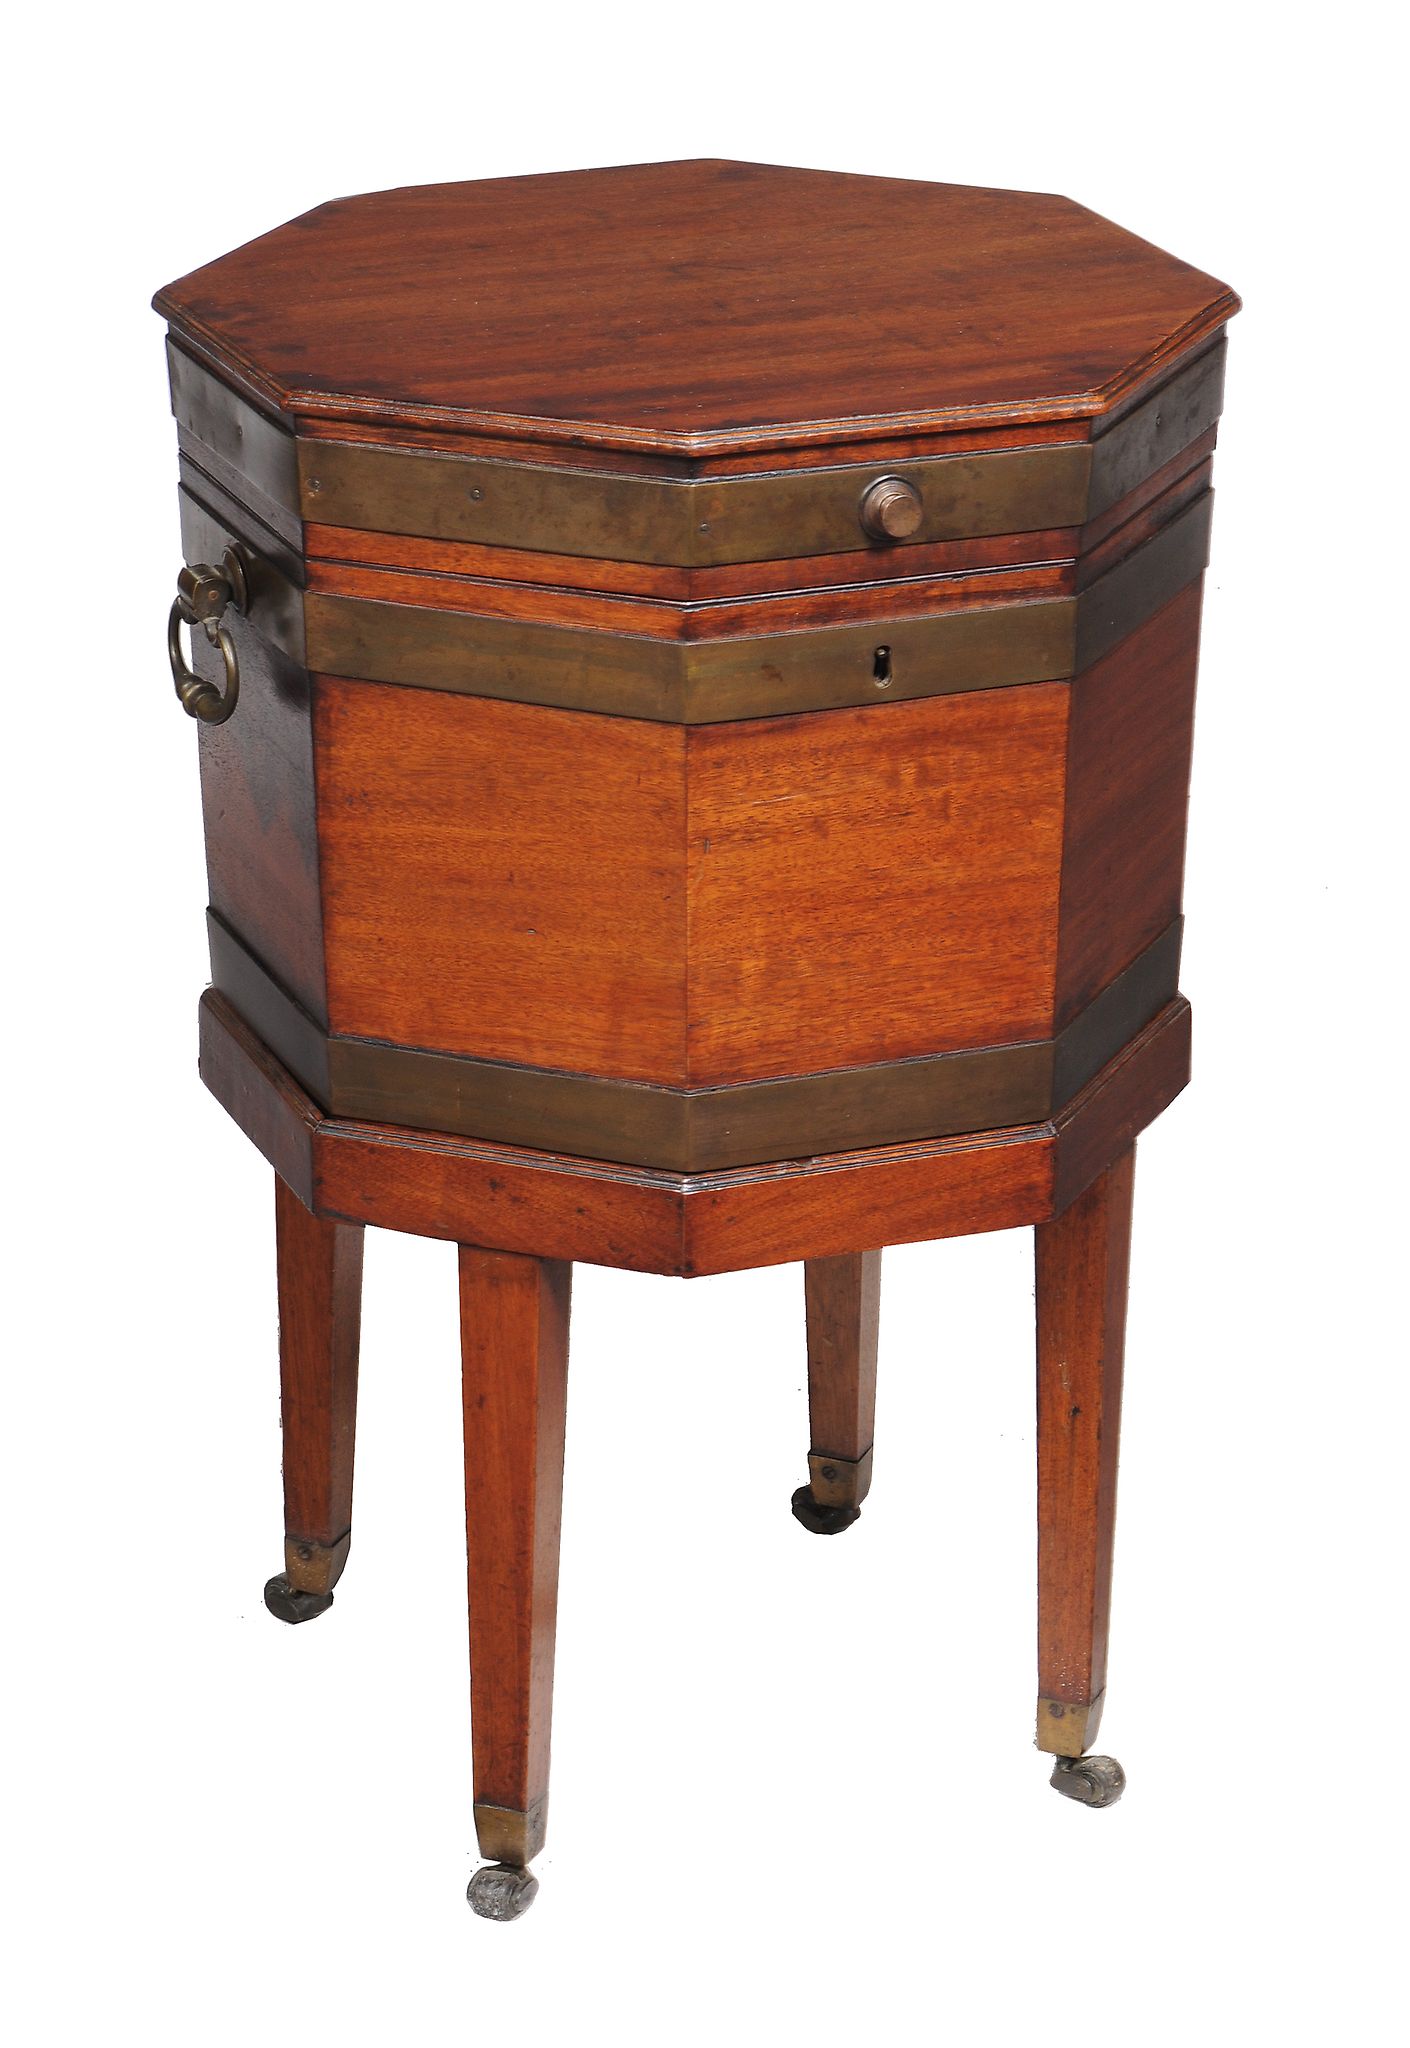 A George III mahogany and brass bound wine cooler , circa 1780, of octagonal form, with lead lined